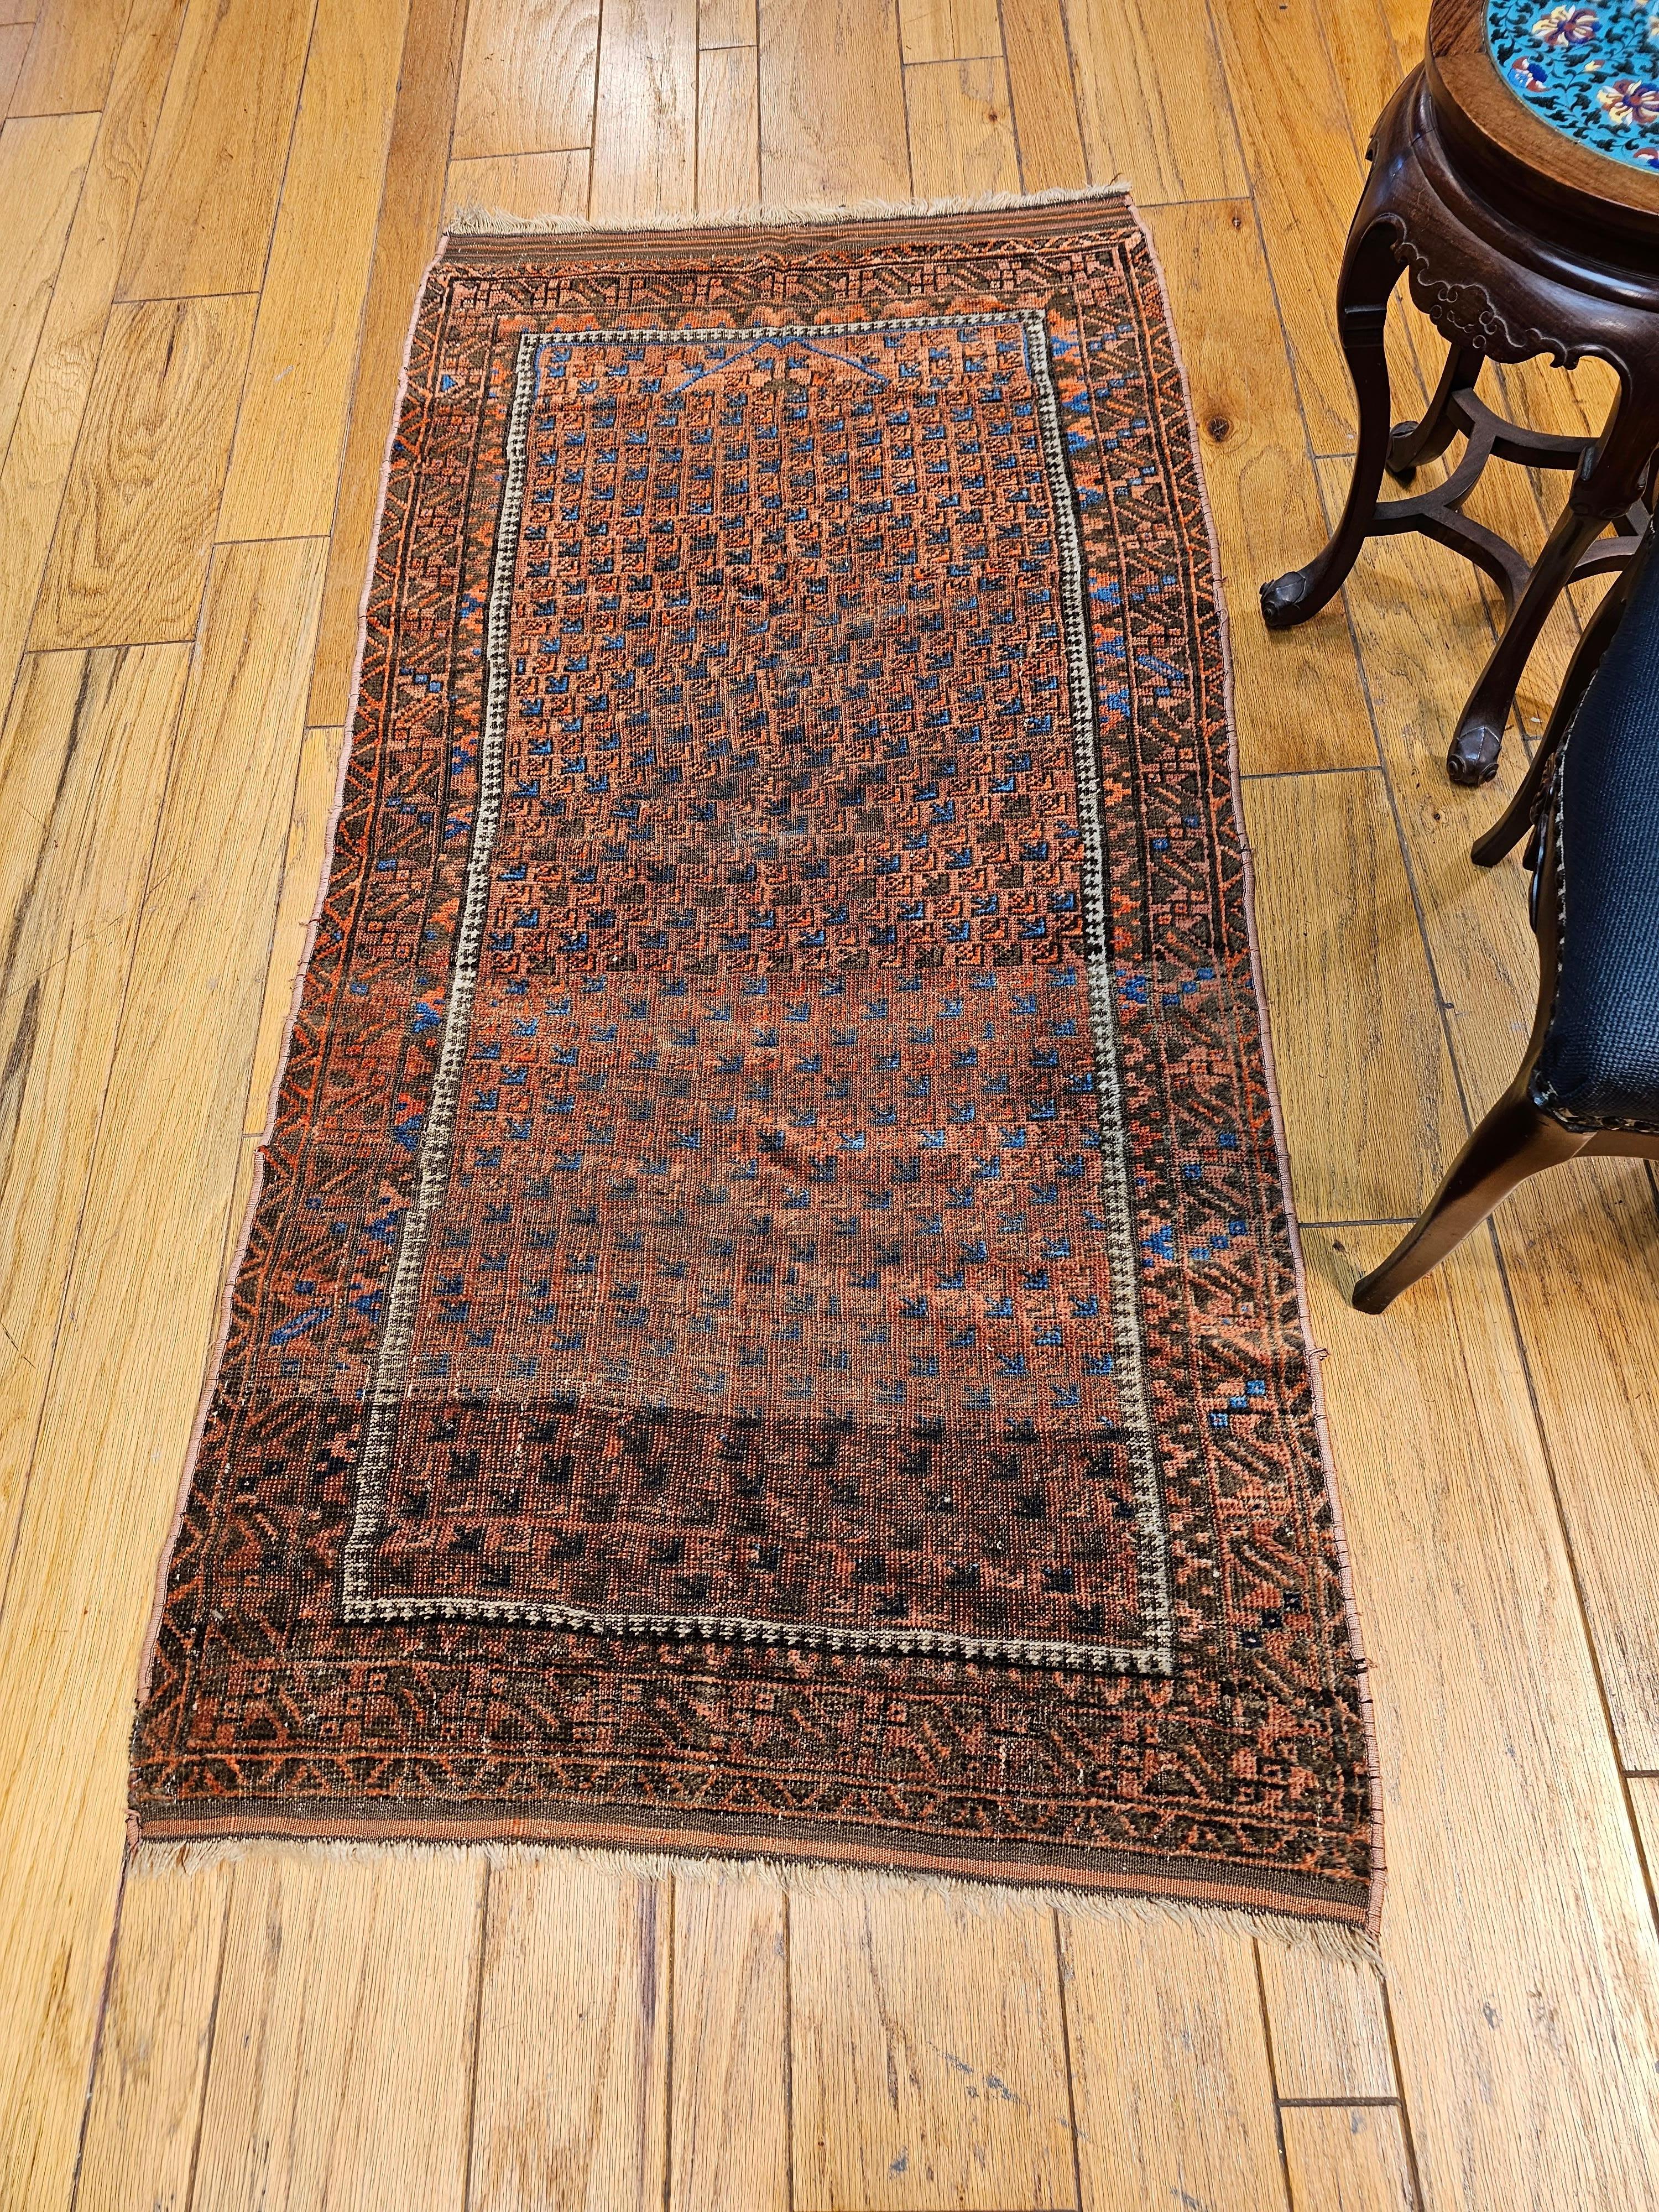 19th century Turkmen Yomut tribal rug from Central Asia in a geometric design pattern in dark red with accent colors in French blue, brown, and ivory.   This Turkmen Yomut is one of the finest tribal weaves from the late nineteenth century. The